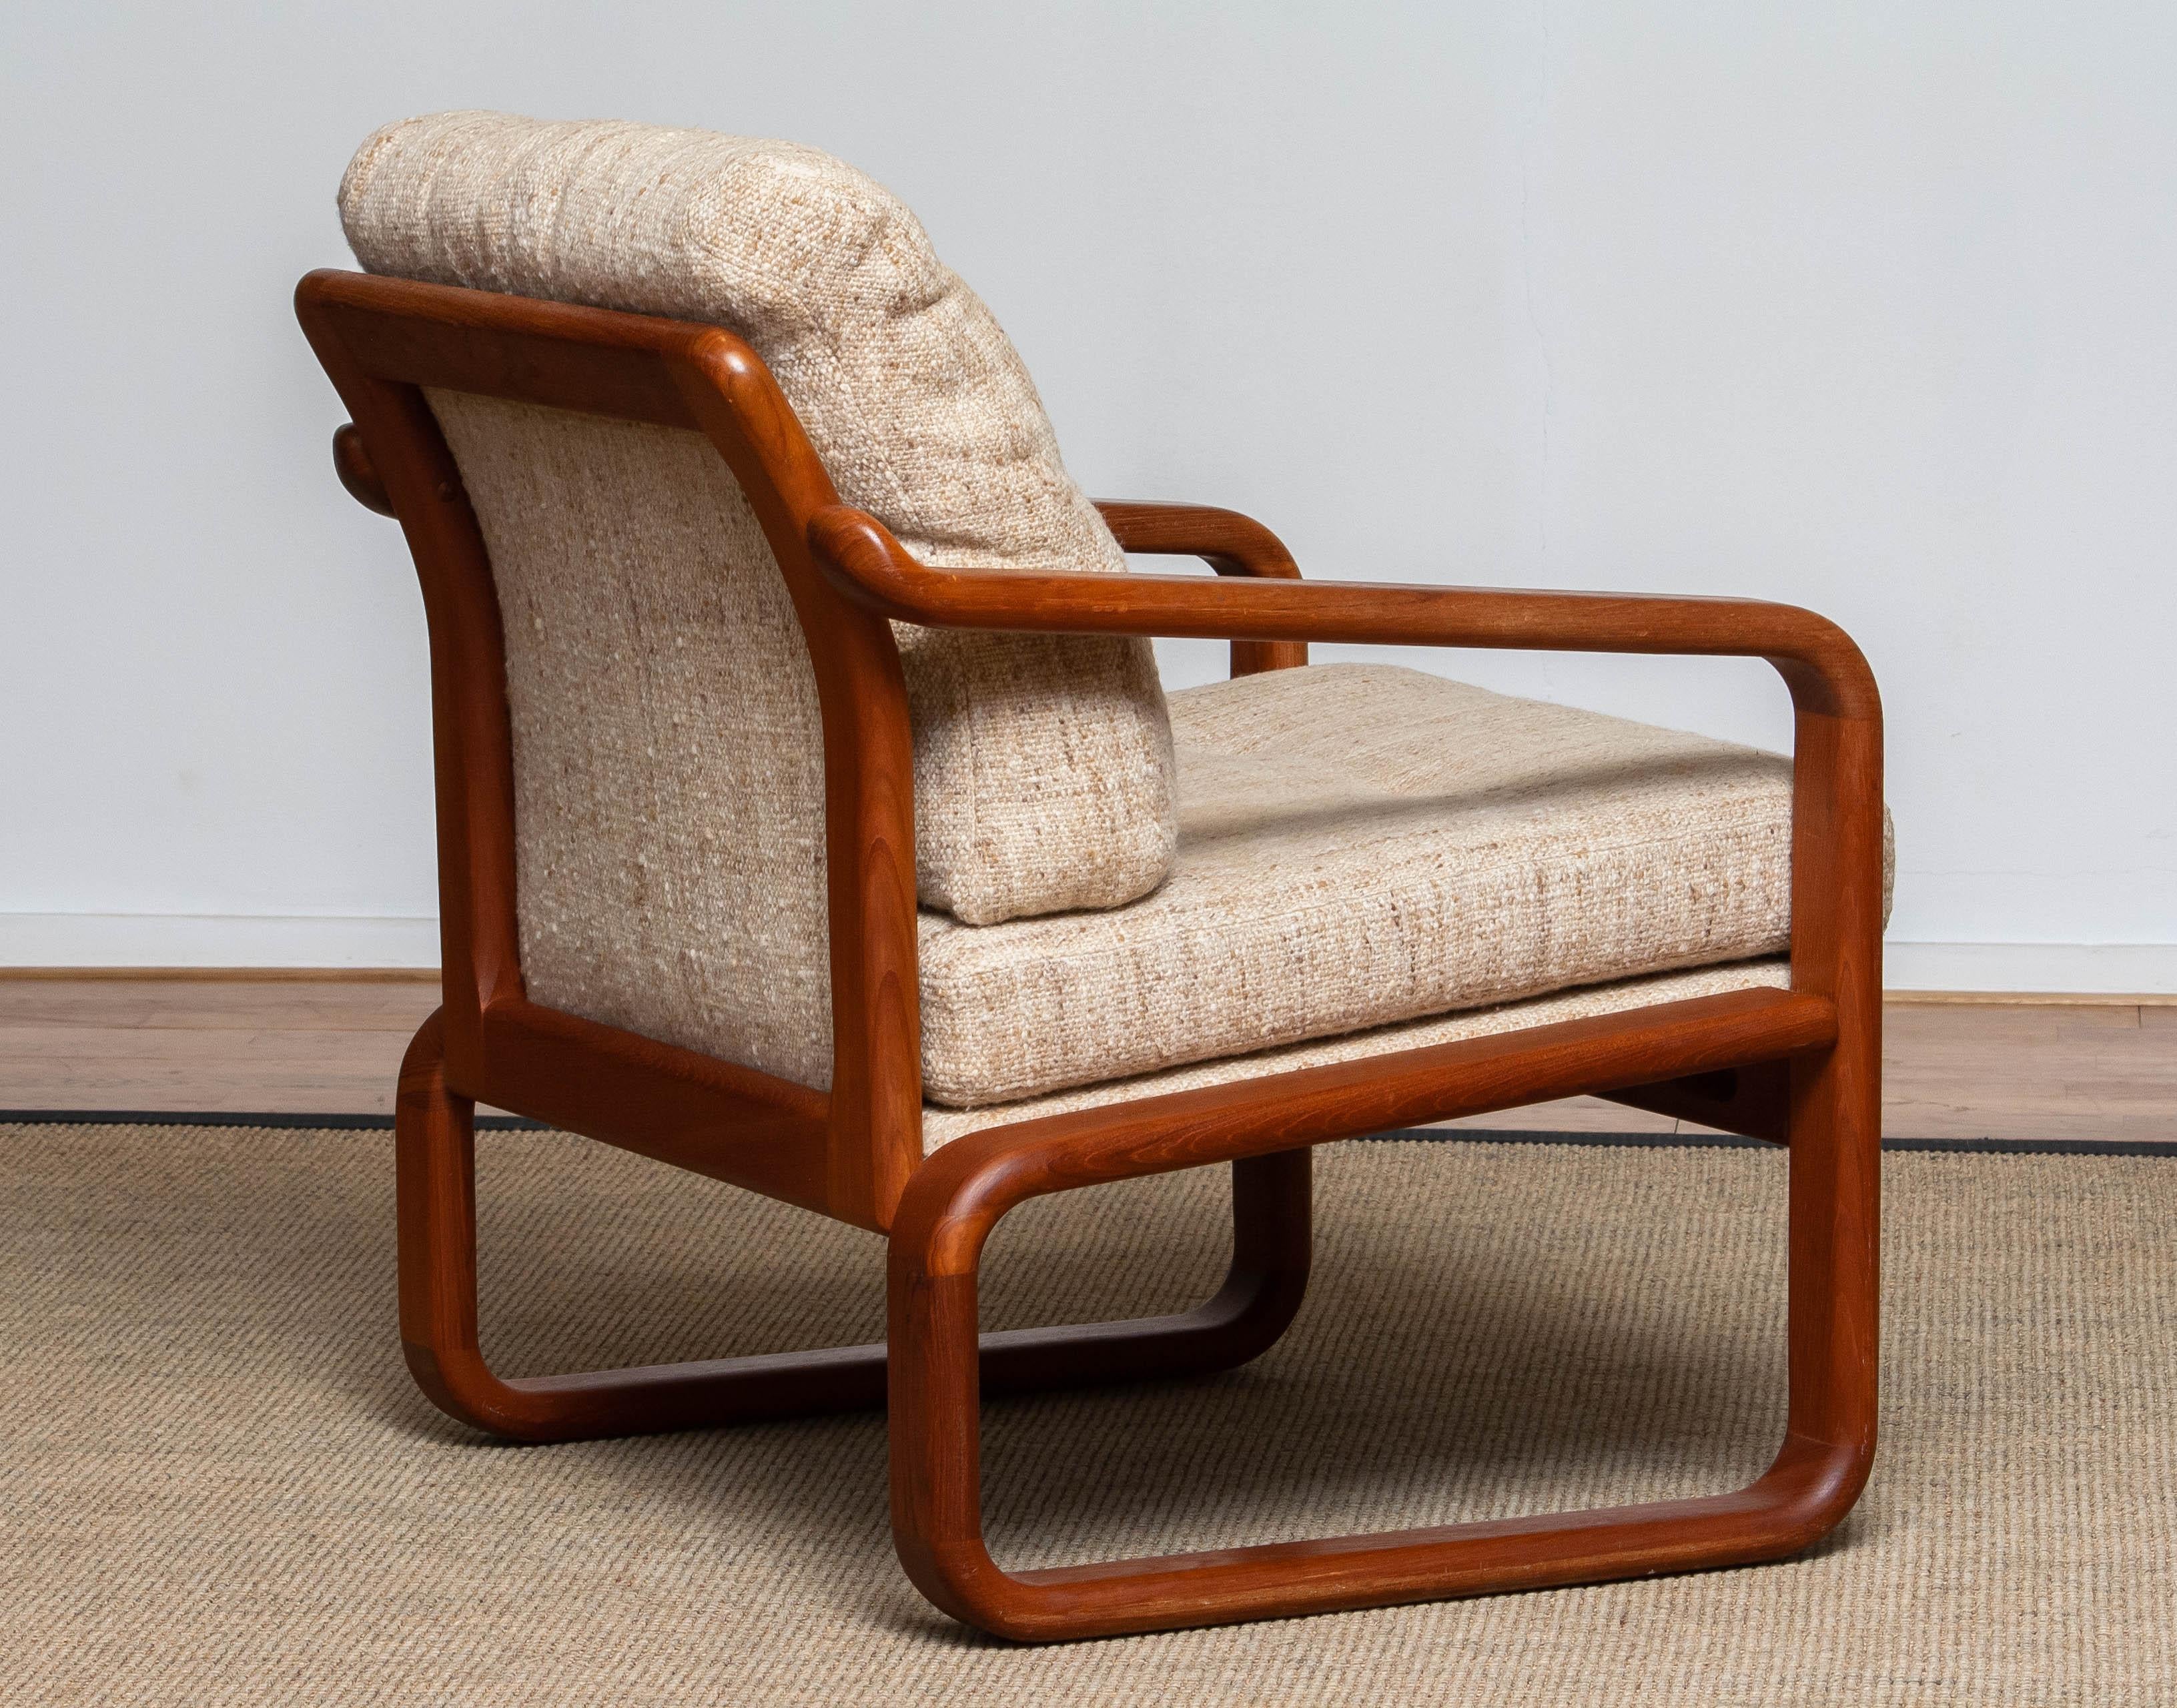 Scandinavian Modern 1980's Teak with Wool Cushions Lounge / Easy / Club Chair by Hs Design, Denmark For Sale